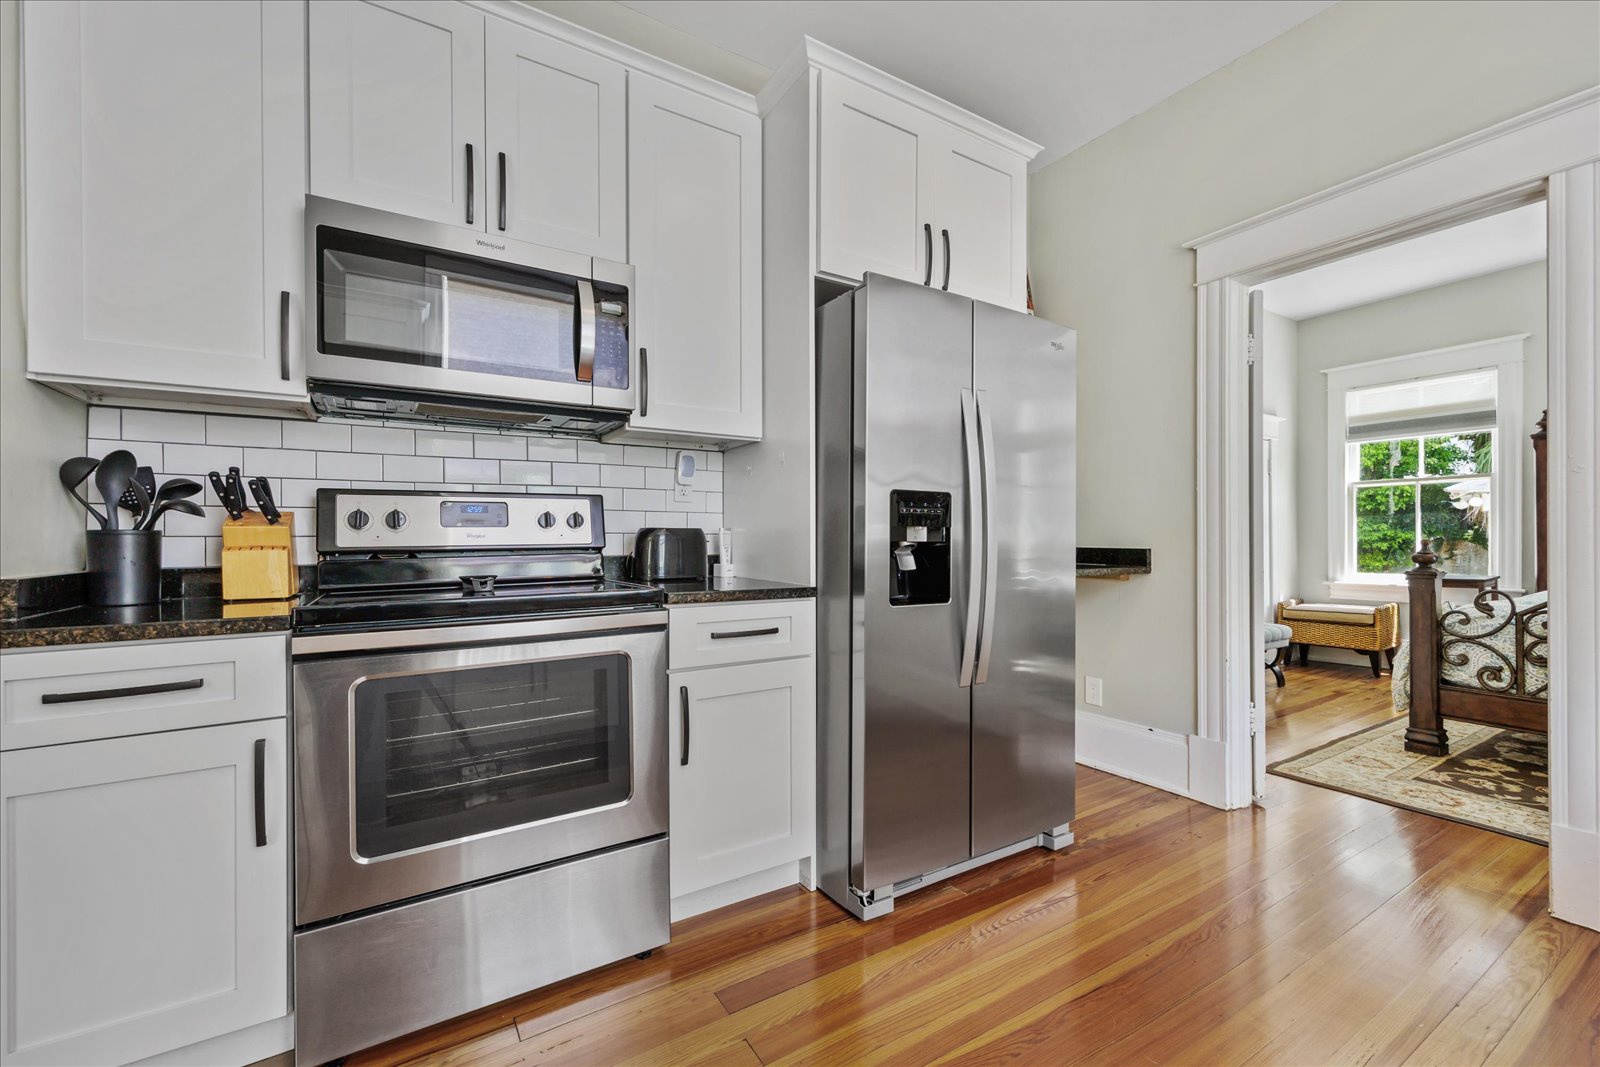 The quaint kitchen offers ample space & all the comforts of home